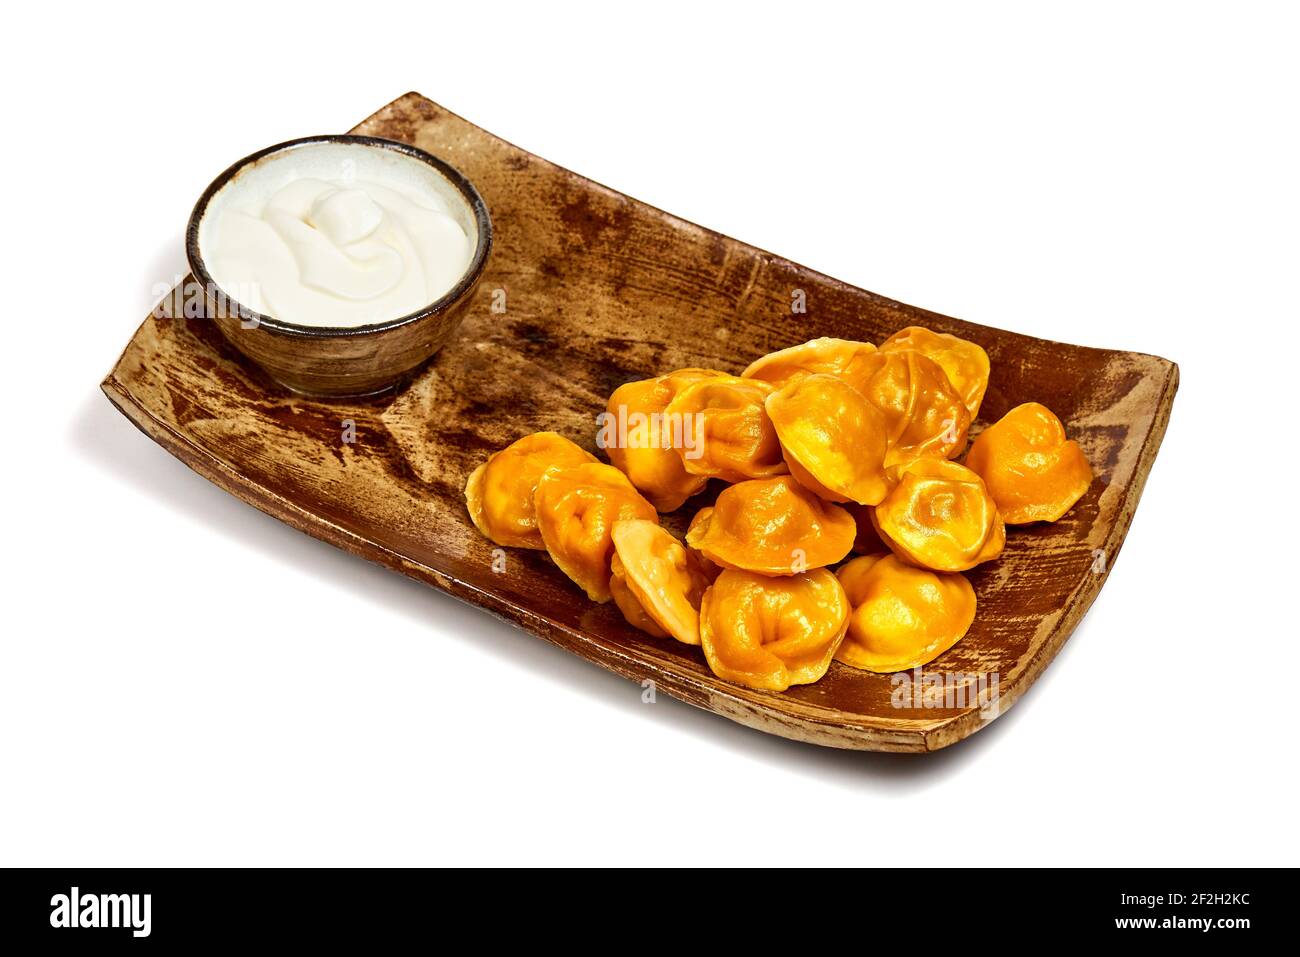 Yellow dim sum on a wooden plate on a white background. Stock Photo